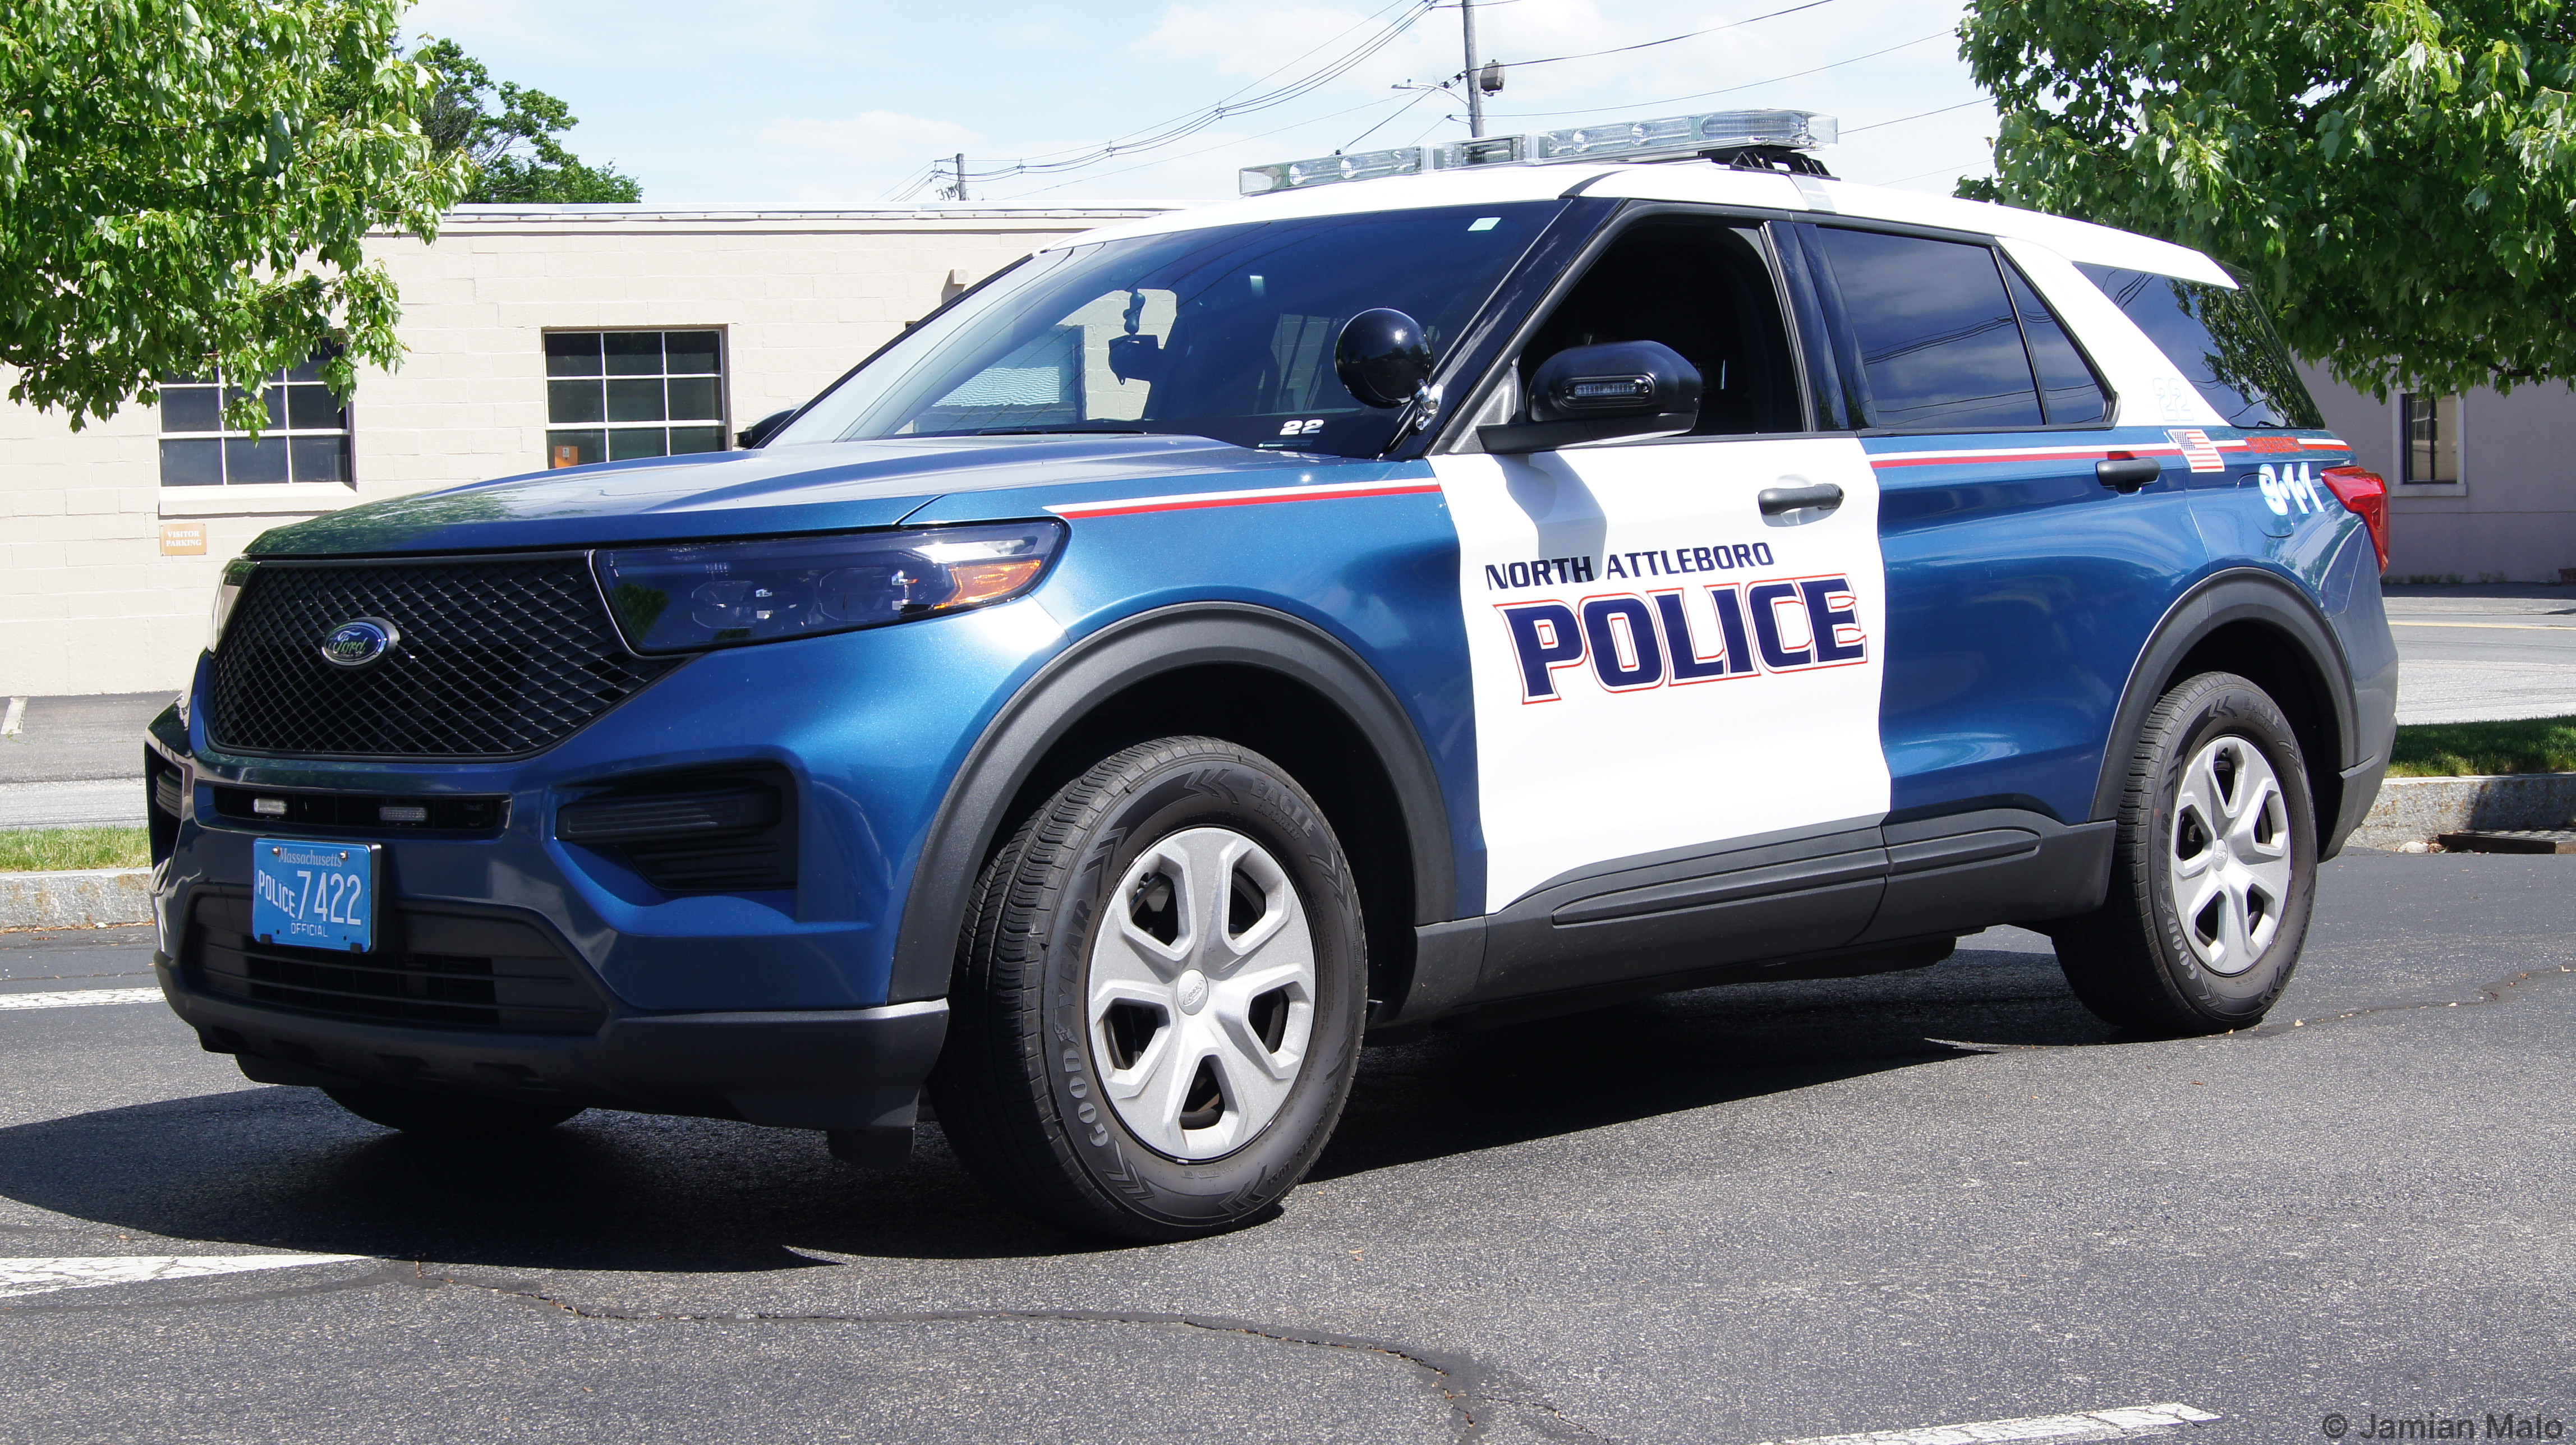 A photo  of North Attleborough Police
            Cruiser 22, a 2020 Ford Police Interceptor Utility             taken by Jamian Malo